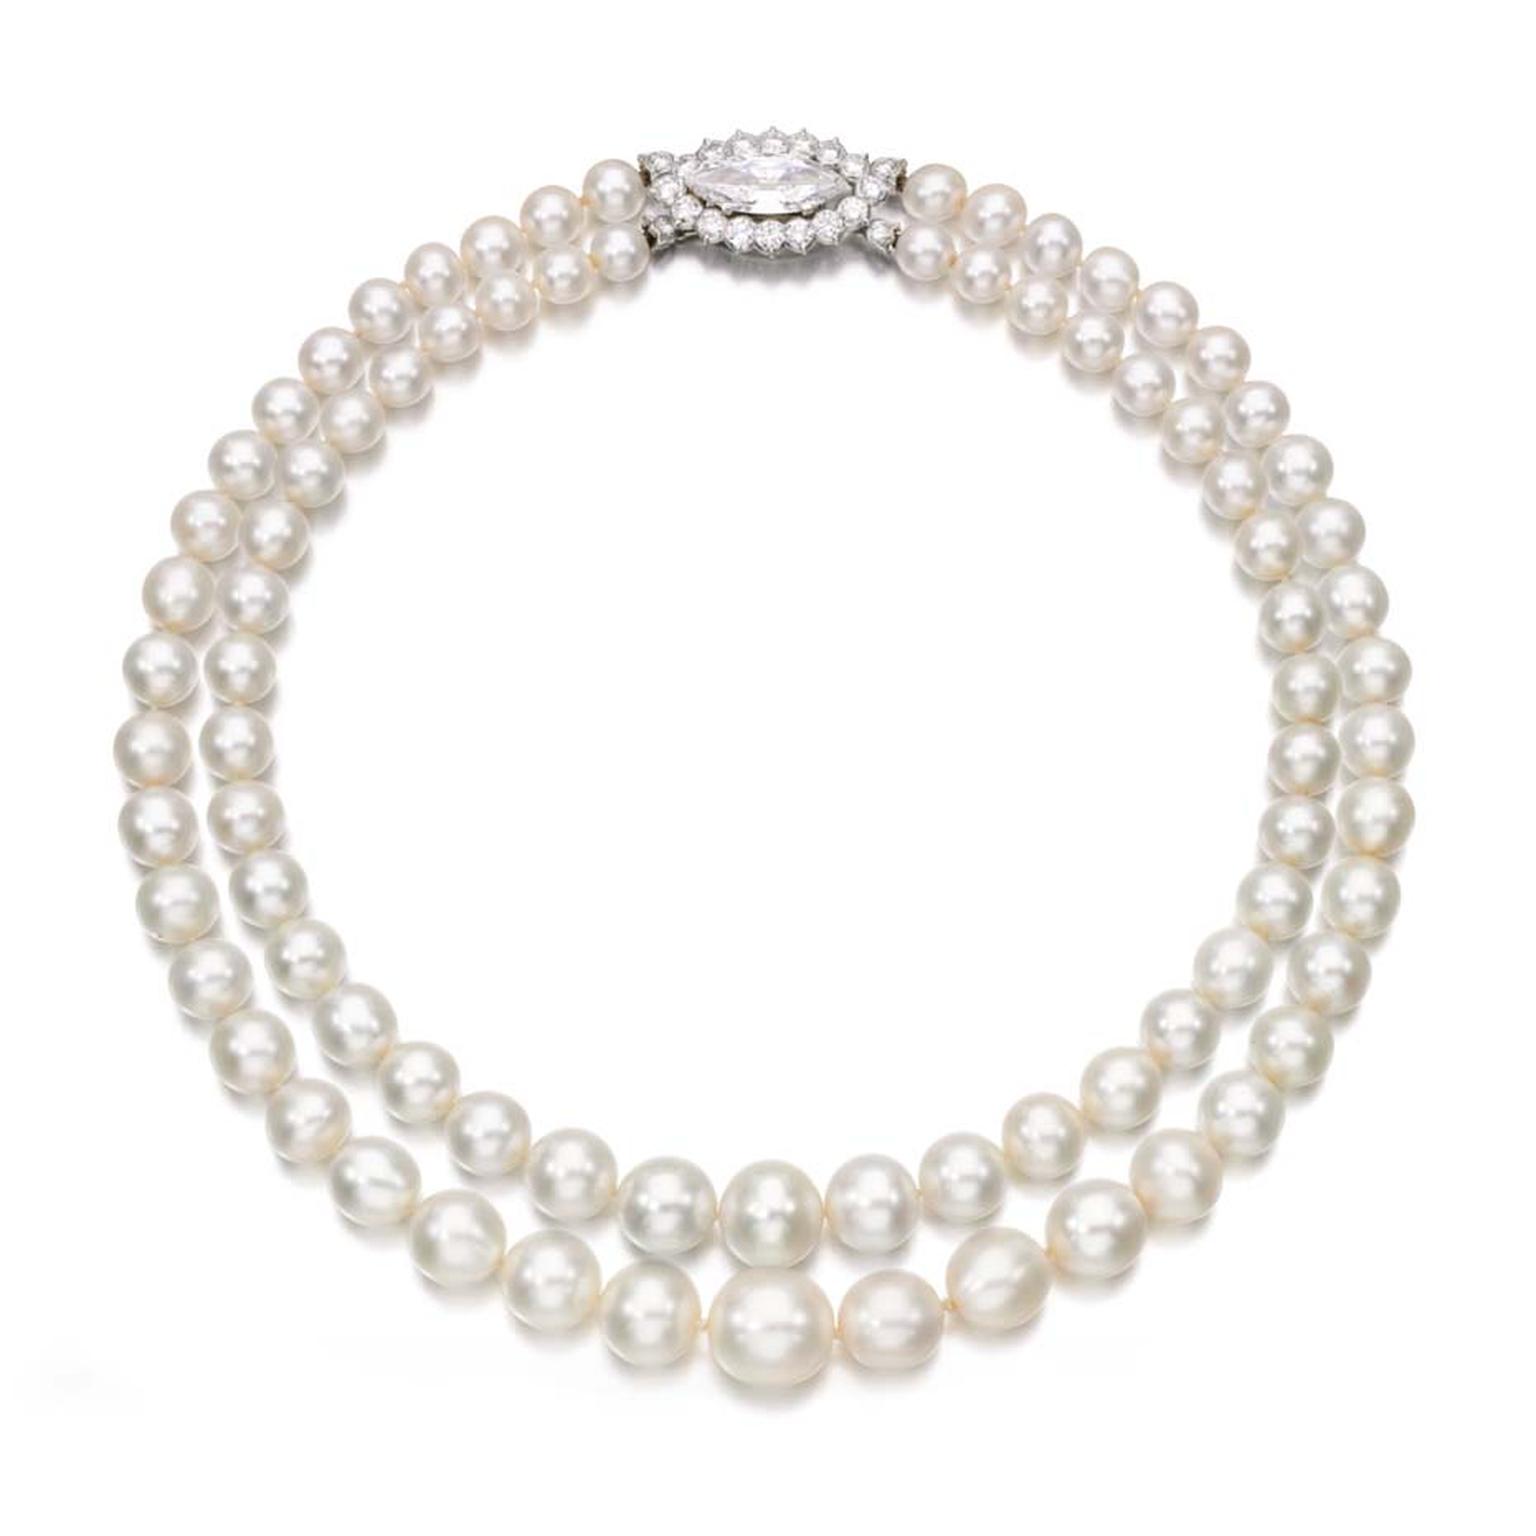 A very rare natural pearl necklace set a new record for a double-row string of pearls at Sotheby’s Geneva this week.